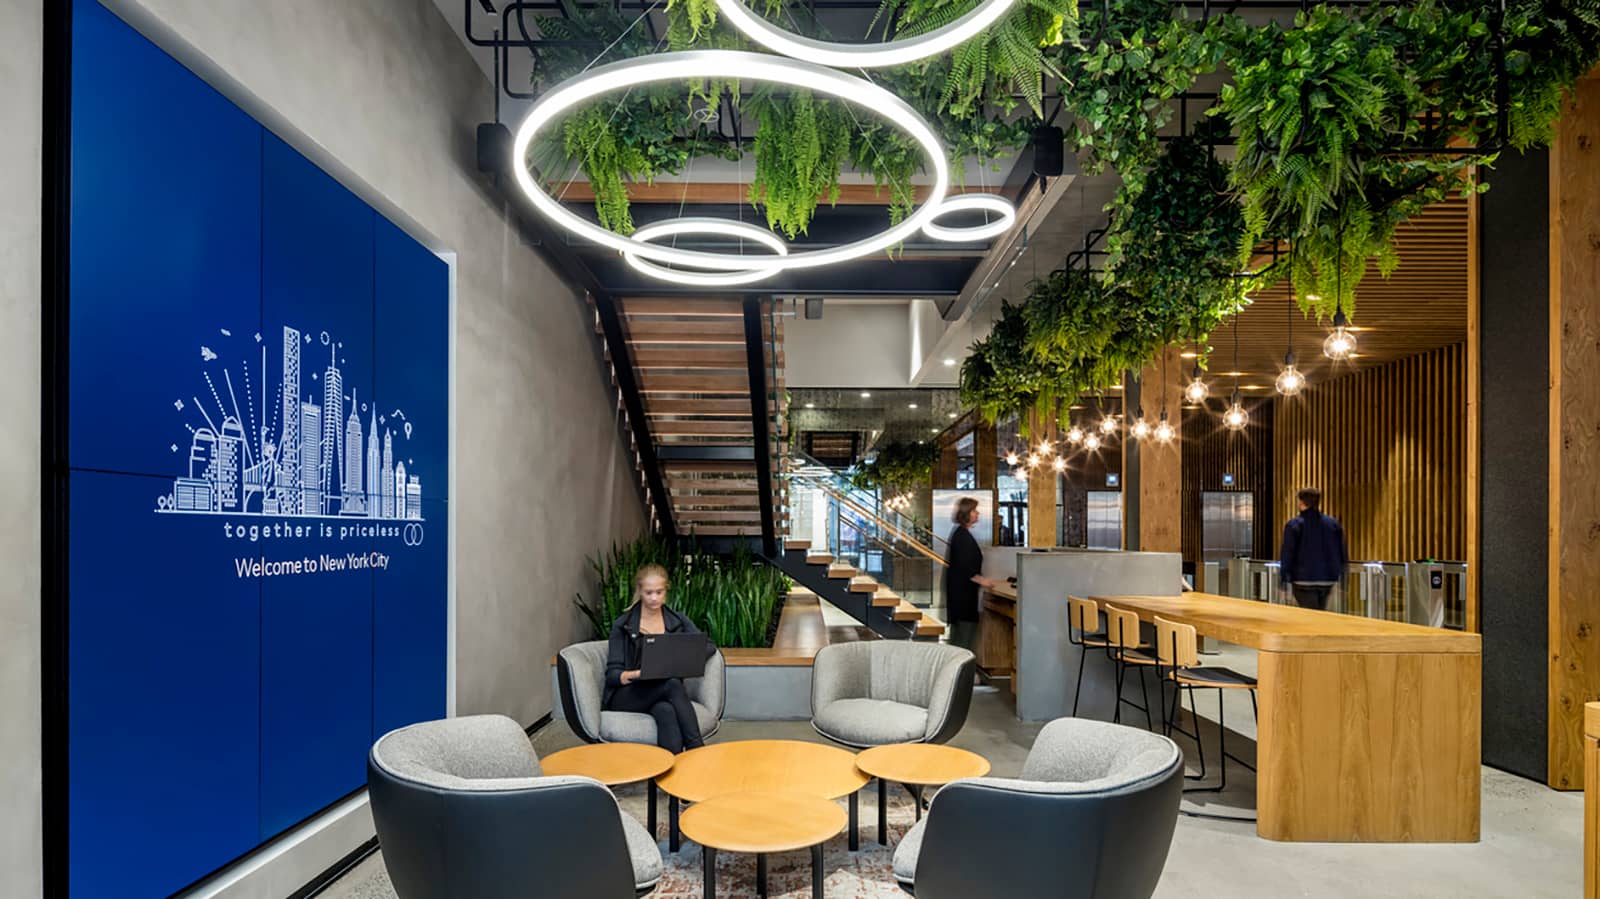 Technology-enabled workplace designed in New York City